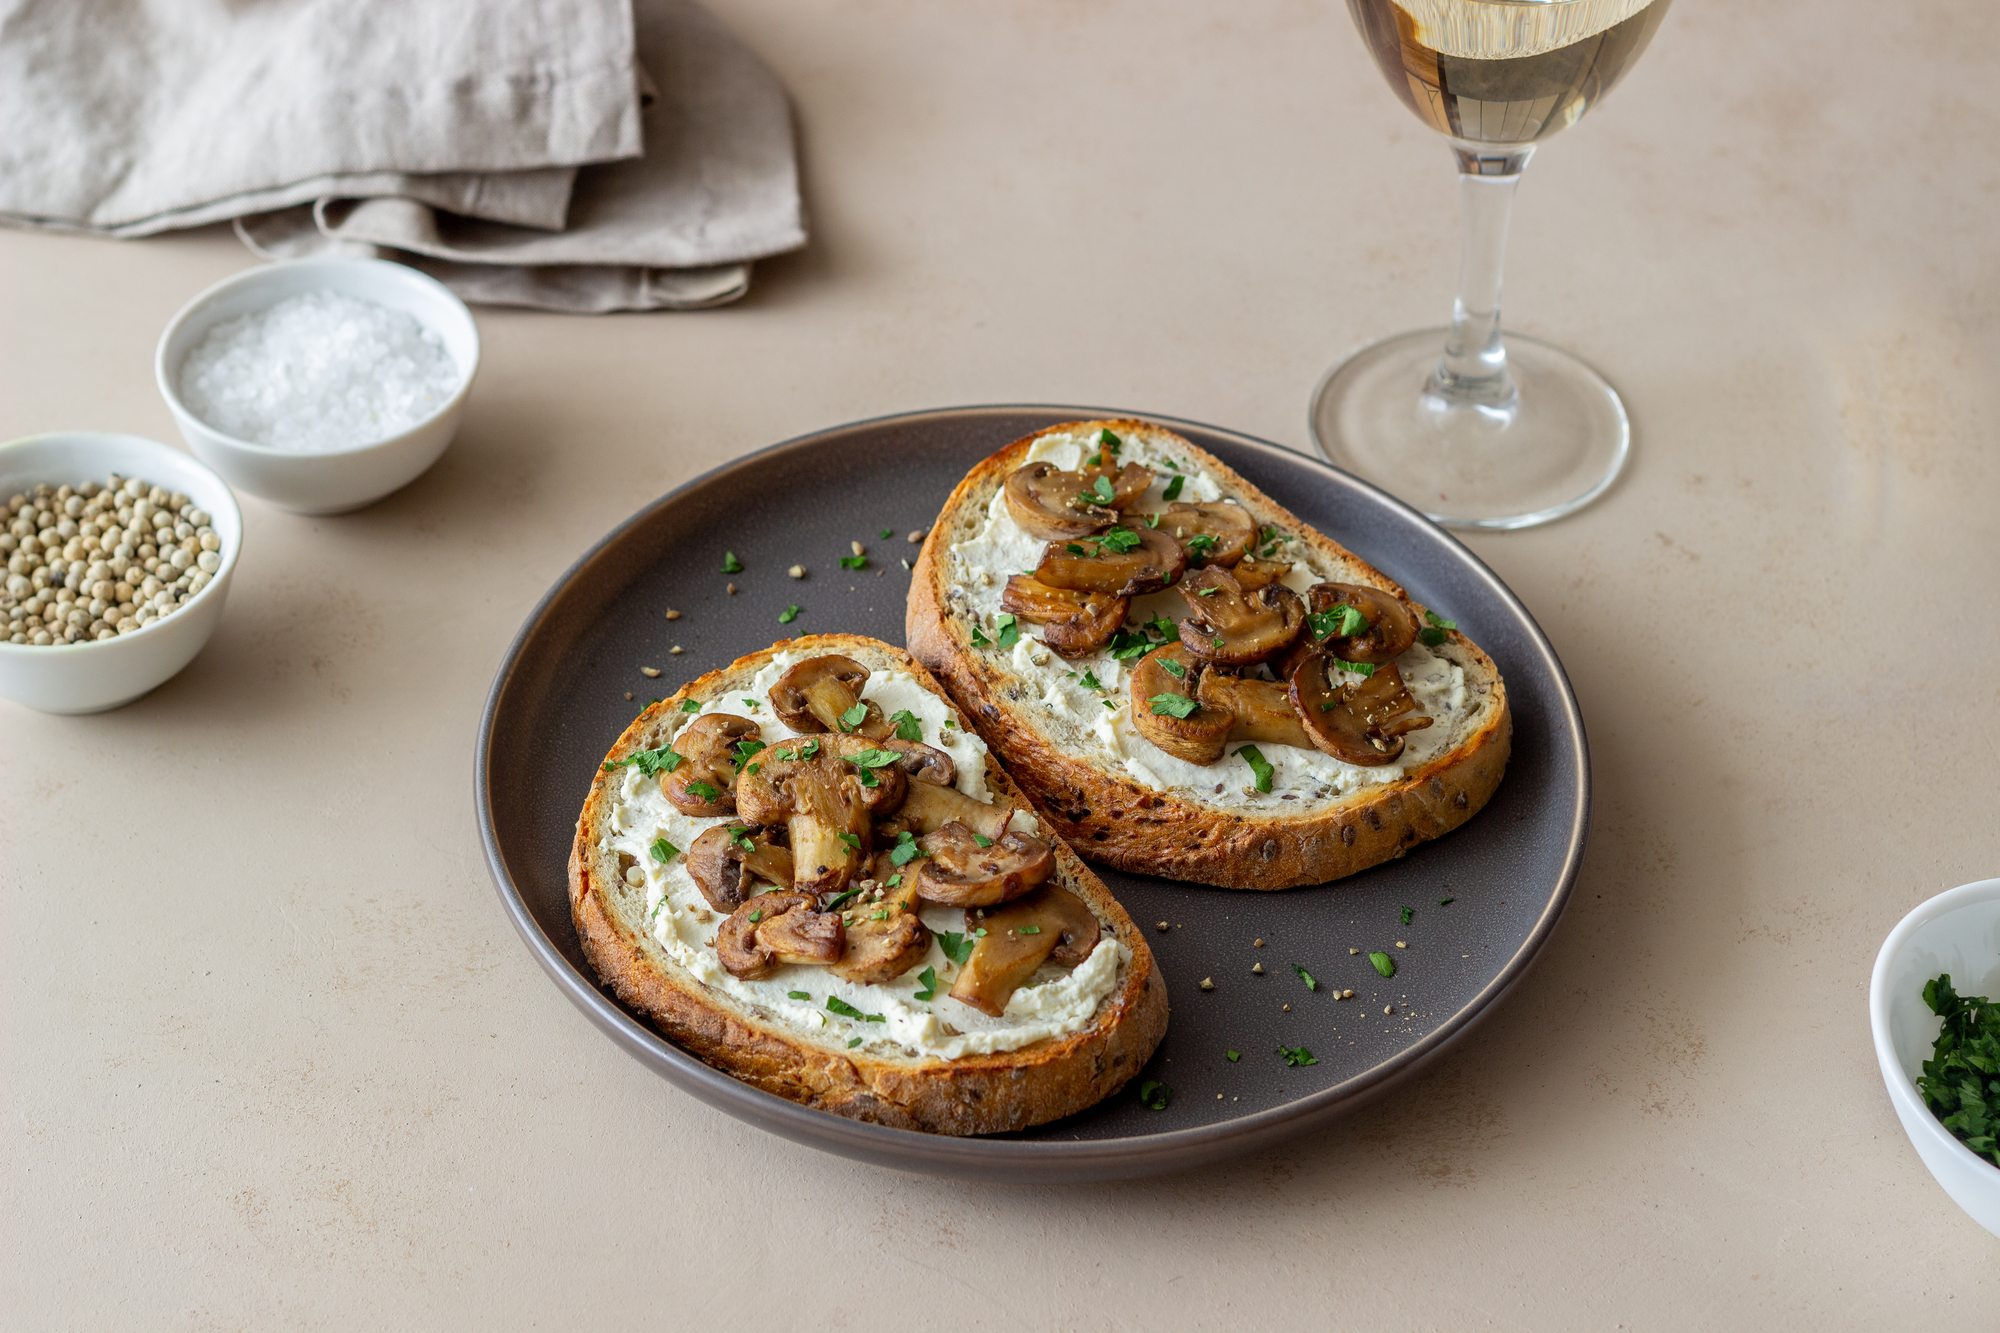 Crostini with Mushrooms and Caramelized Onions